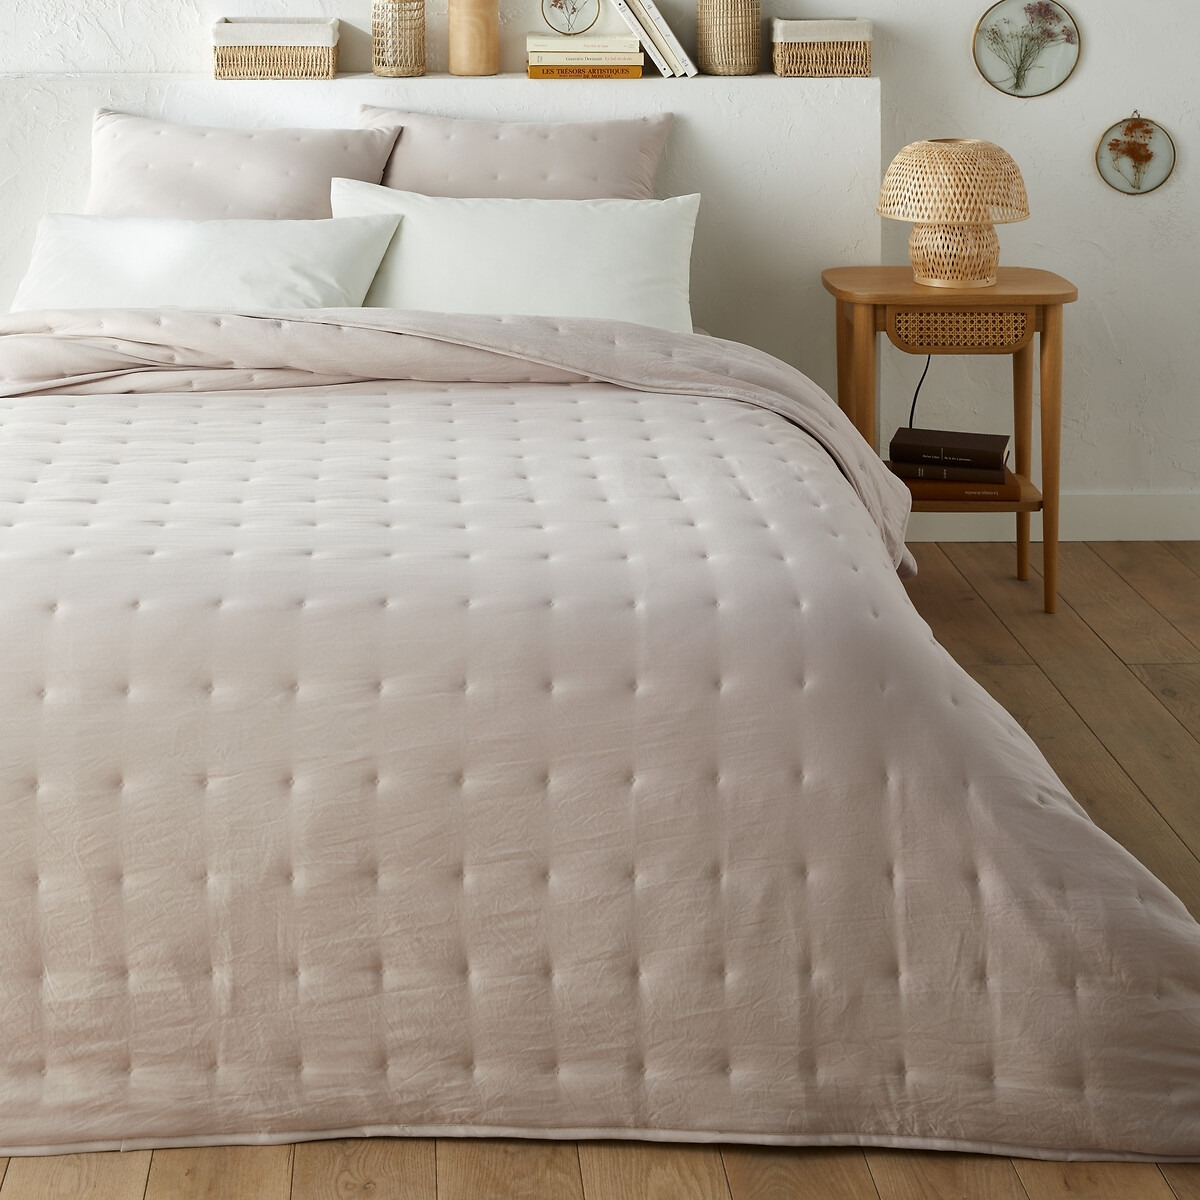 Loja Quilted Bedspread - image 1